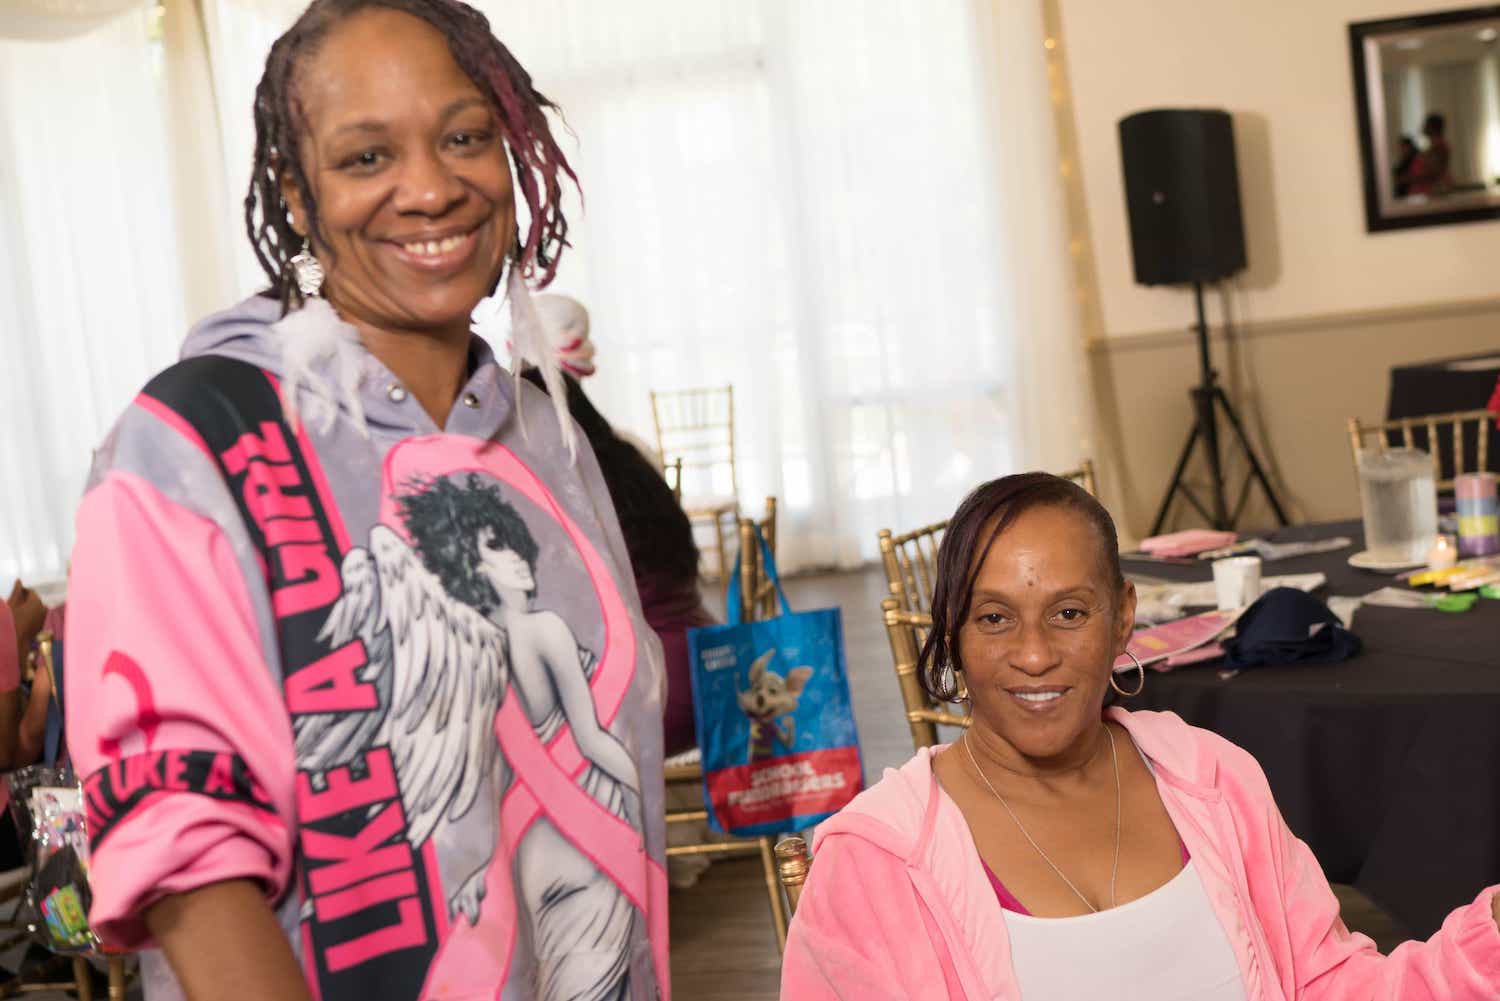 Black Women for Wellness Annual Risqué Breast Health Conference 9